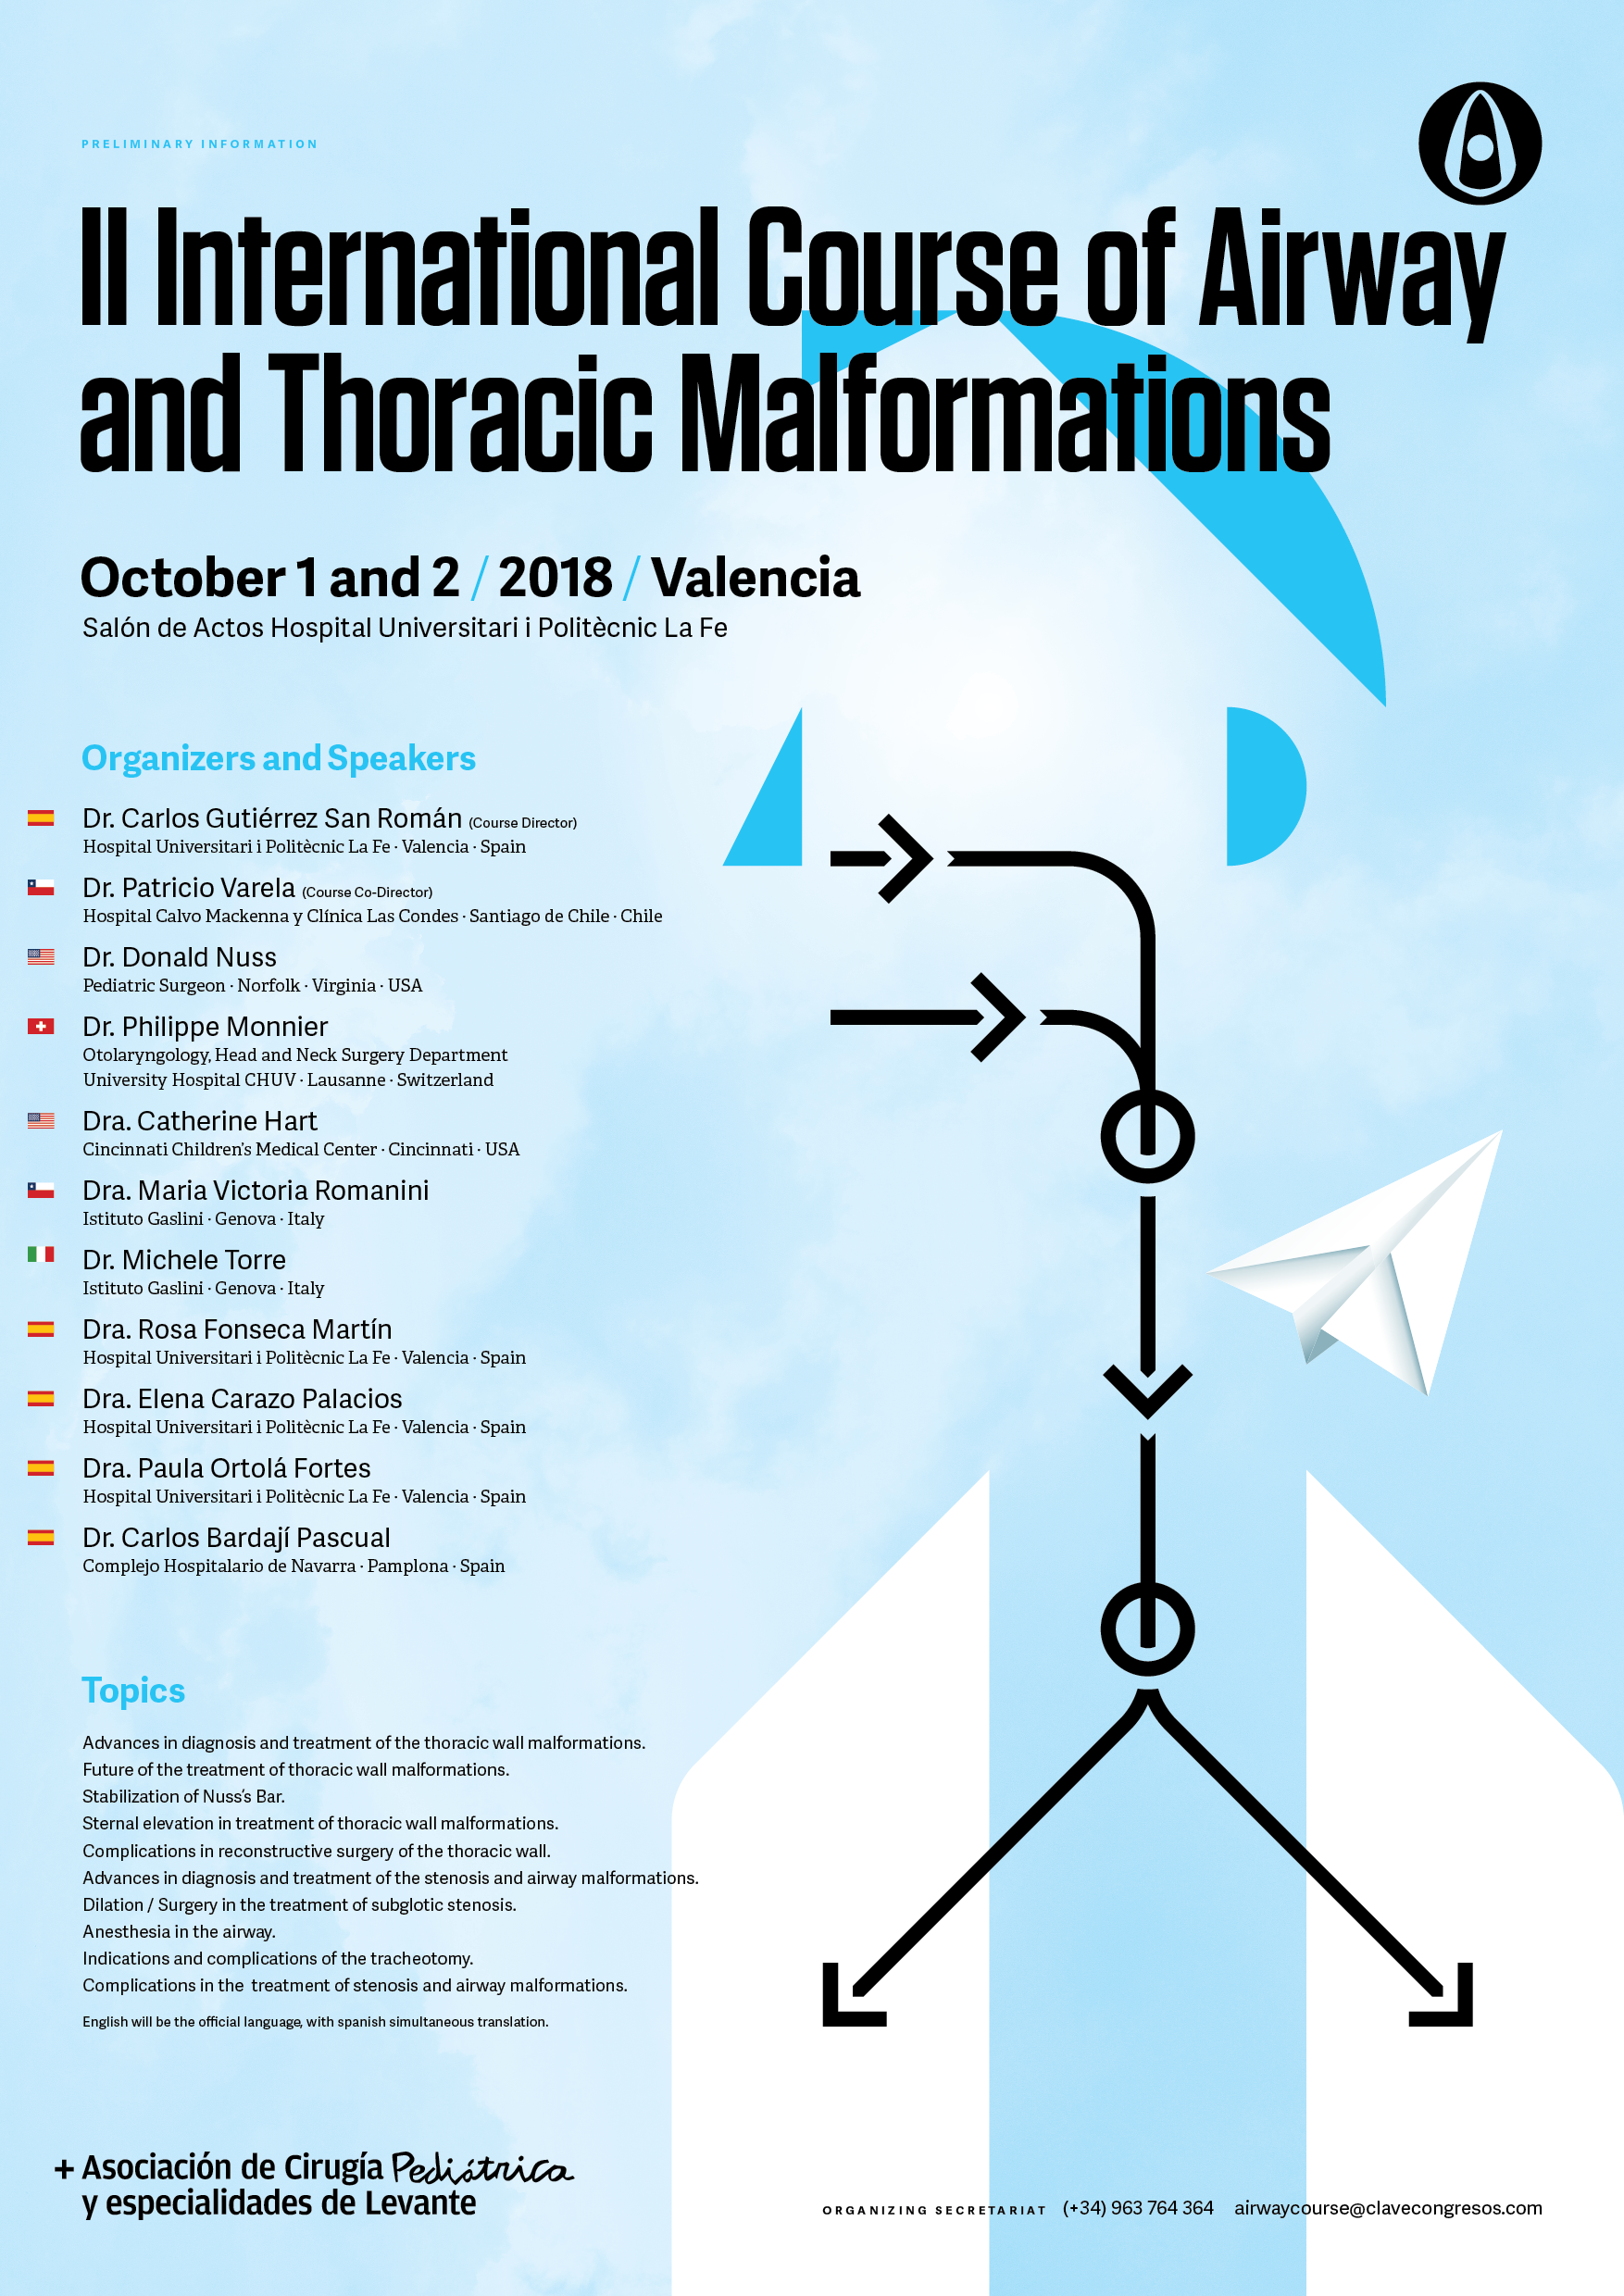 II International Course of Airway and Thoracic Malformations